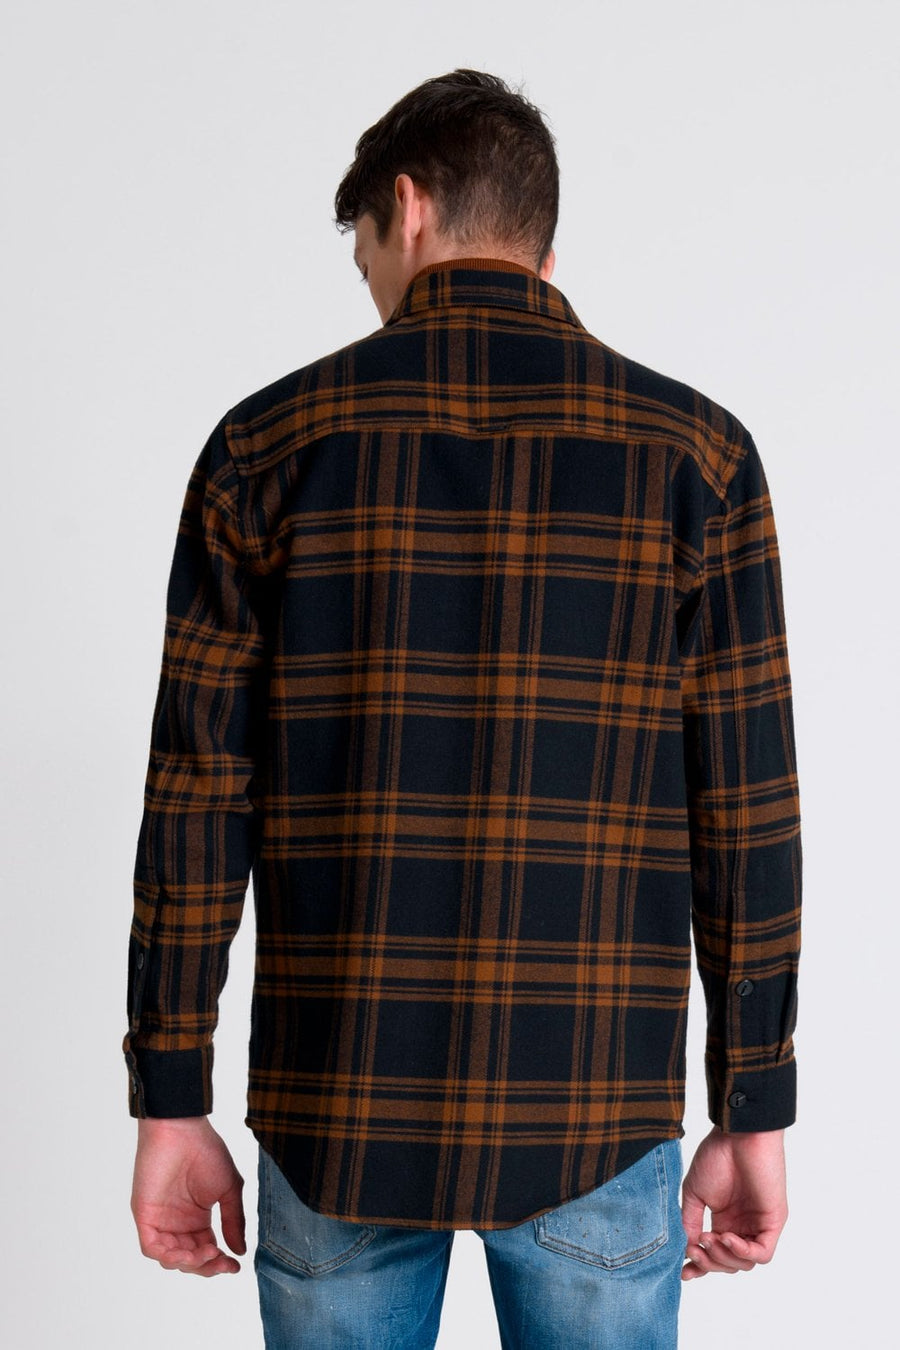 Buy the Antony Morato Checked Overshirt in Black/Brown at Intro. Spend £50 for free UK delivery. Official stockists. We ship worldwide.